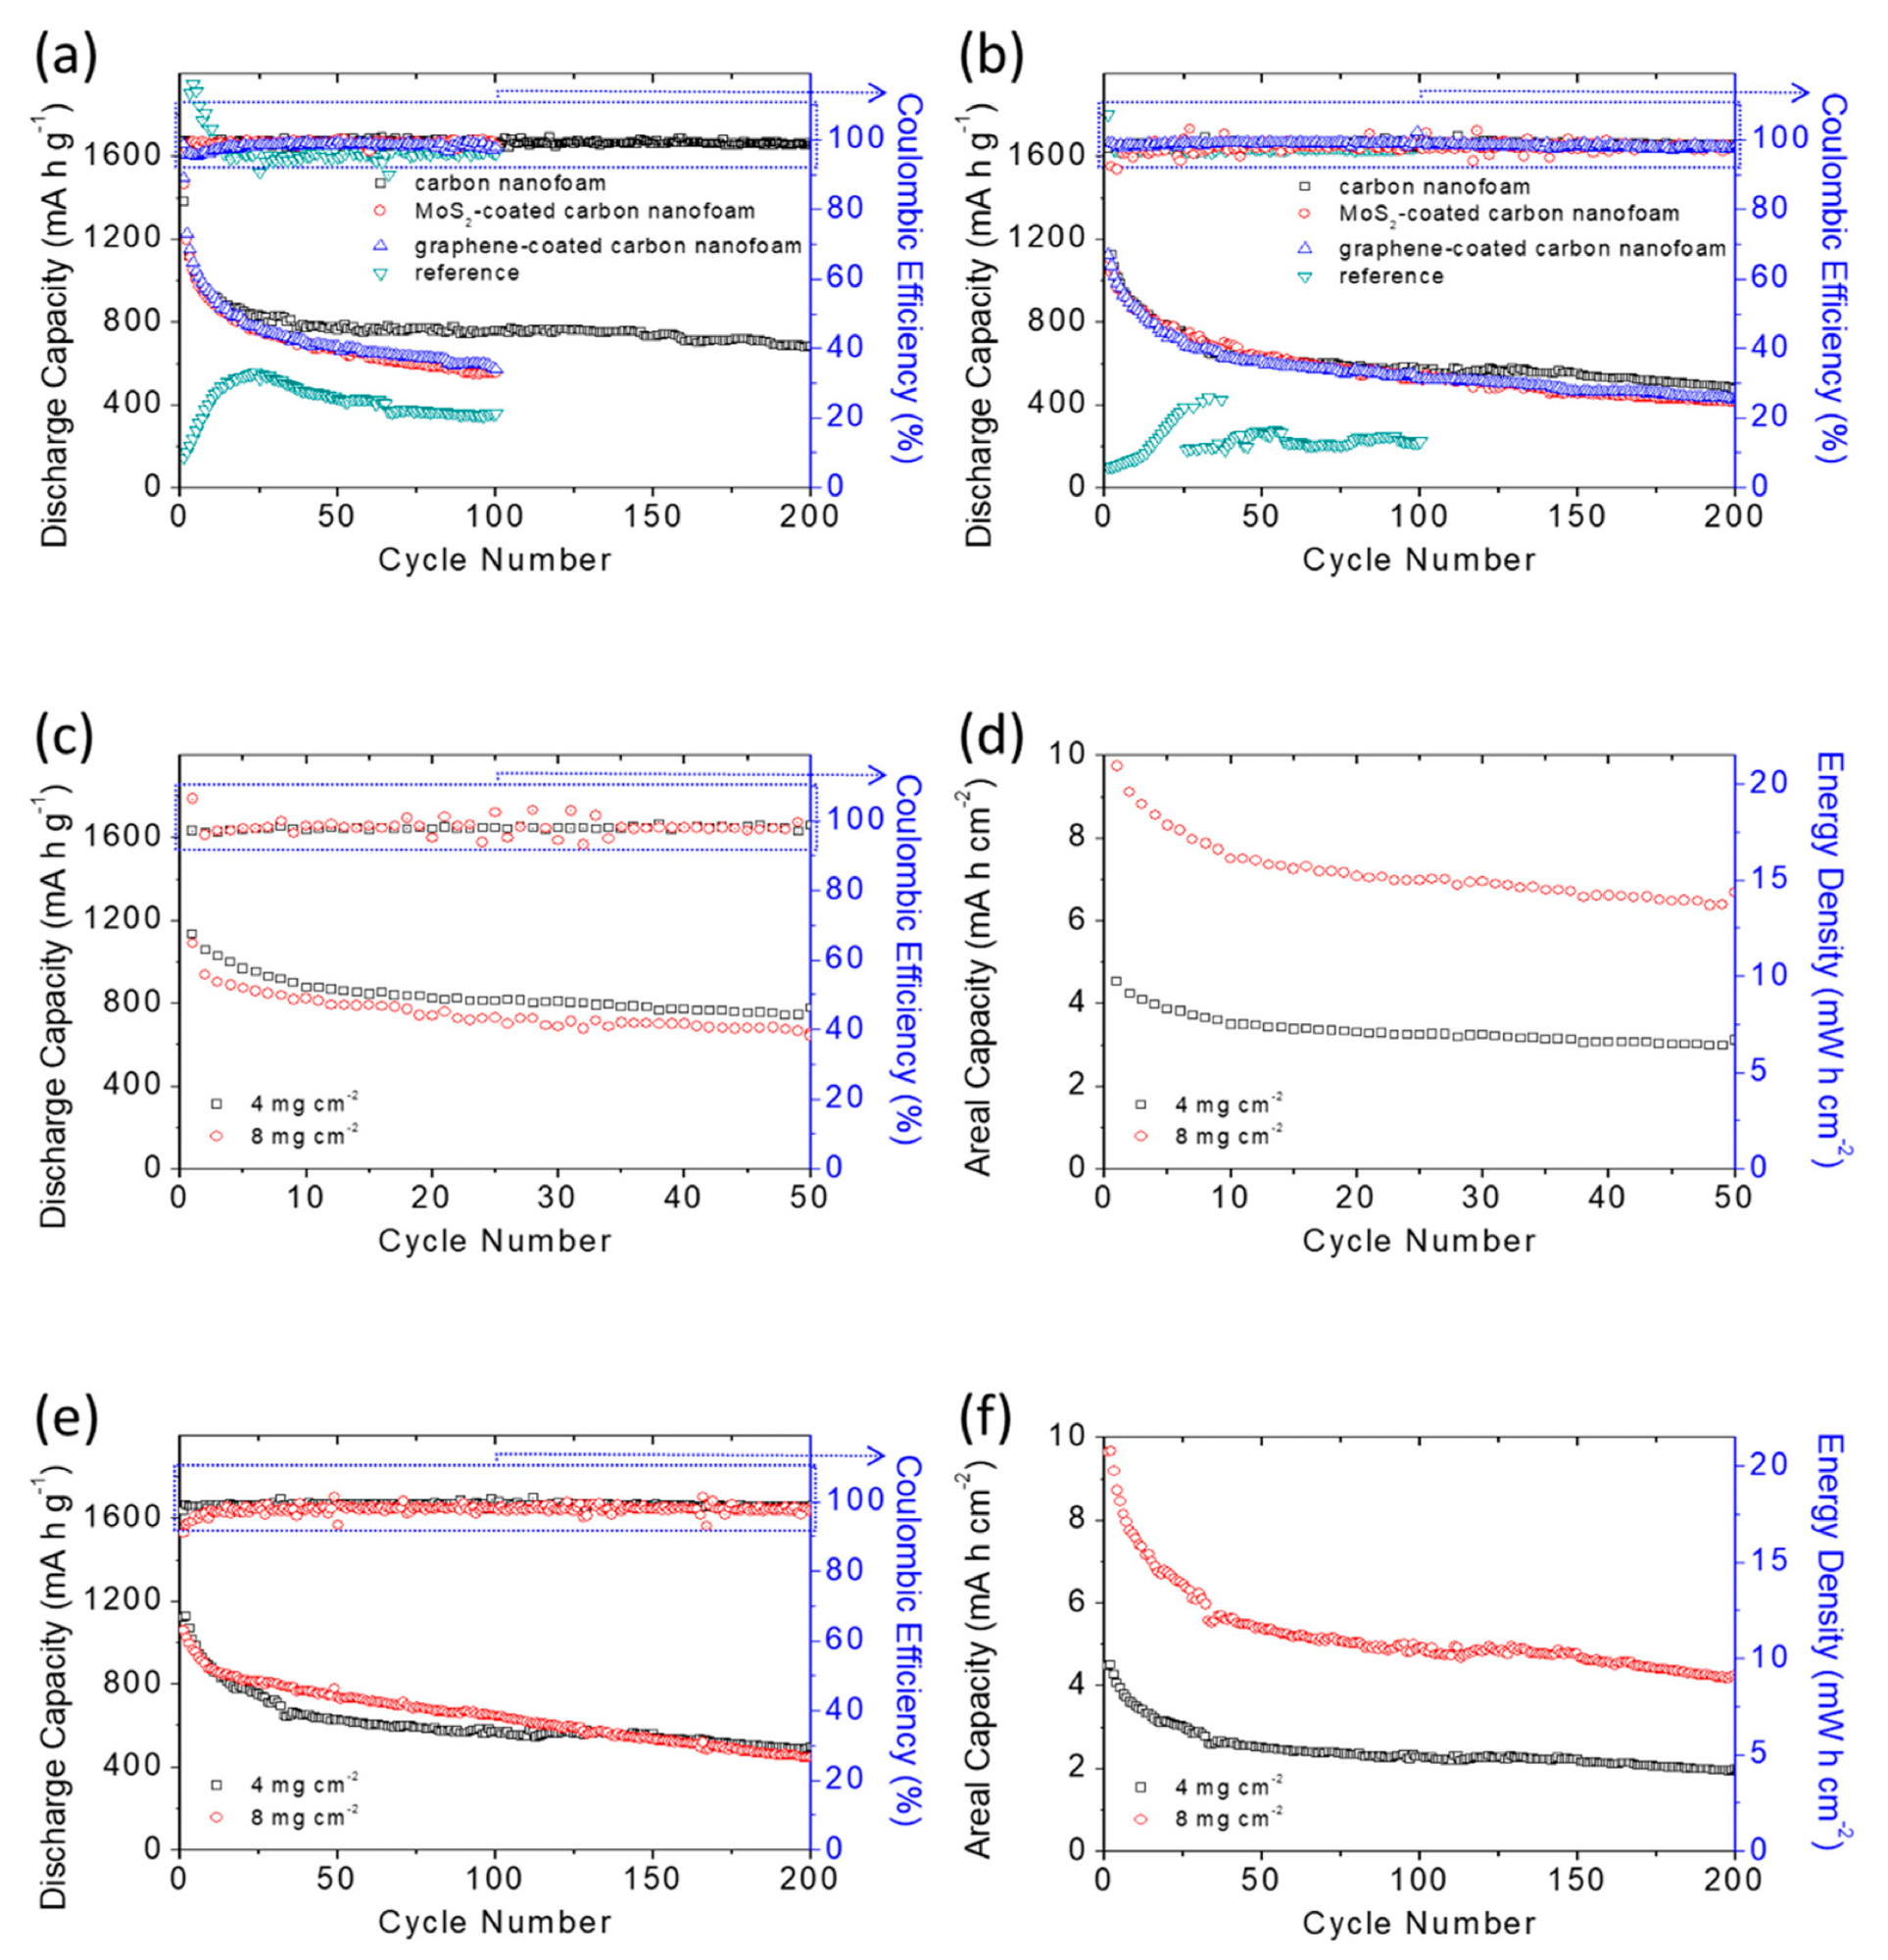 Battery performance analysis: cyclability of the sulfur cathodes with various carbon-nanofoam interlayers at (a) the C/20 rate and (b) the C/10 rate; battery performance and areal capacity and energy density analysis of the high-loading sulfur cathodes with the carbon-nanofoam interlayer at (c,d) the C/20 rate and (e,f) the C/10 rate.